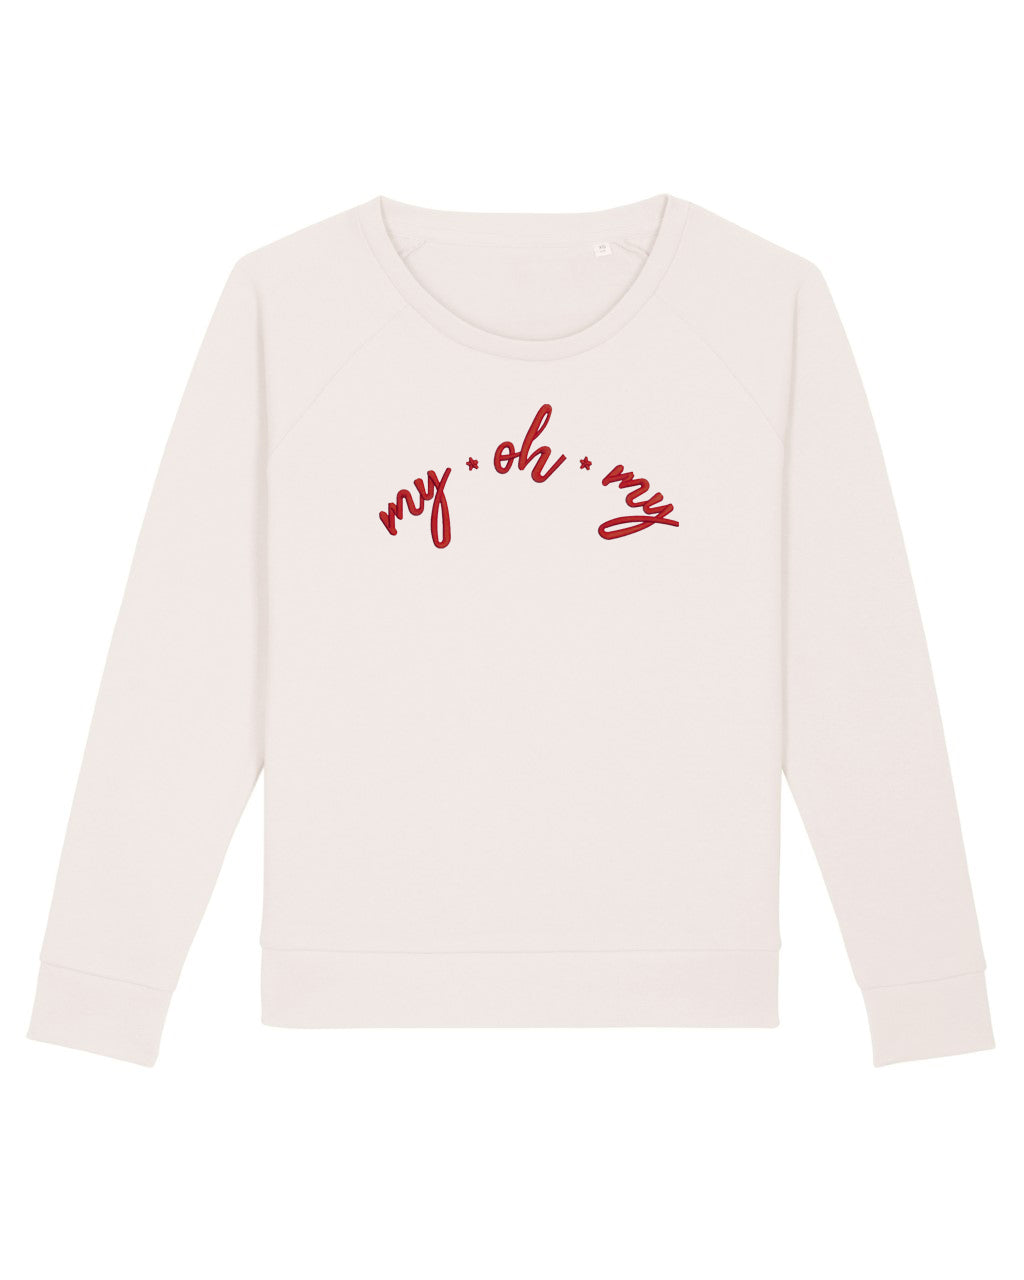 Vintage White My Oh My Sweatshirt (red embroidery). MADE TO ORDER